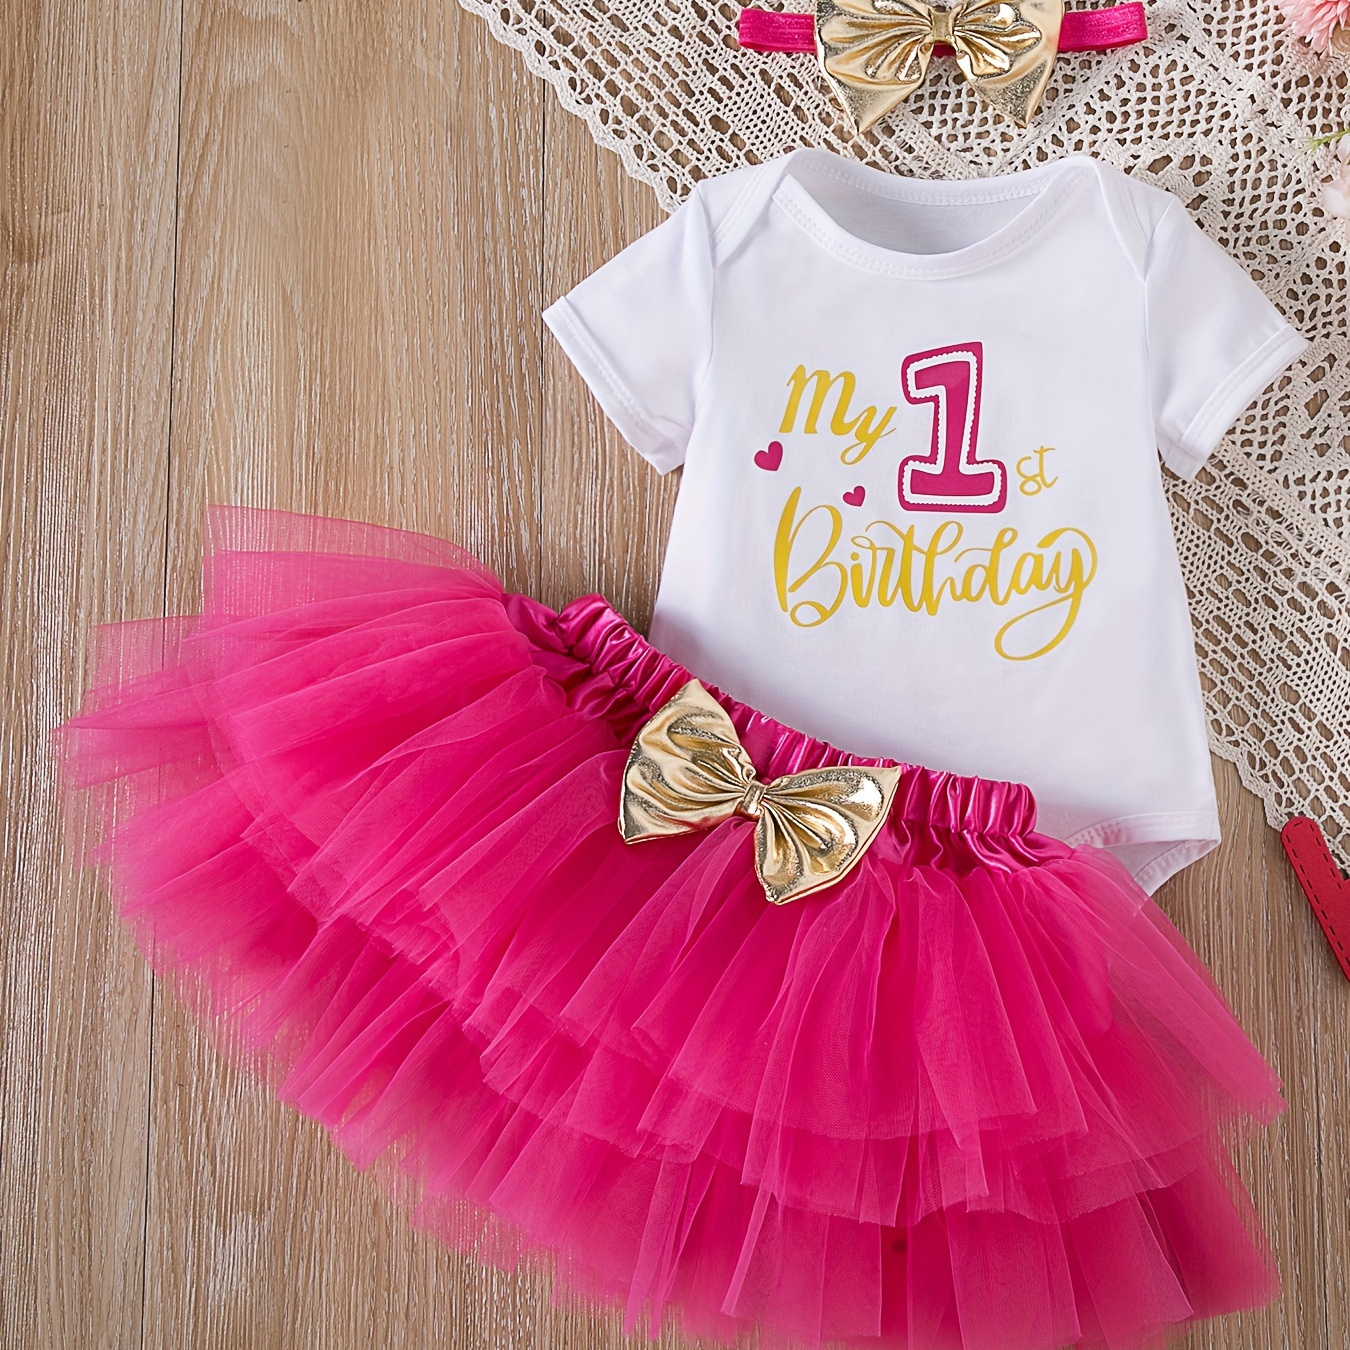 

2pcs Baby Girl's Birthday Dress Set, New Summer Printed Letter A-line Short Sleeved Jumpsuit, Princess Skirt, Hair Accessories Set, Baby's First Birthday Party Dress